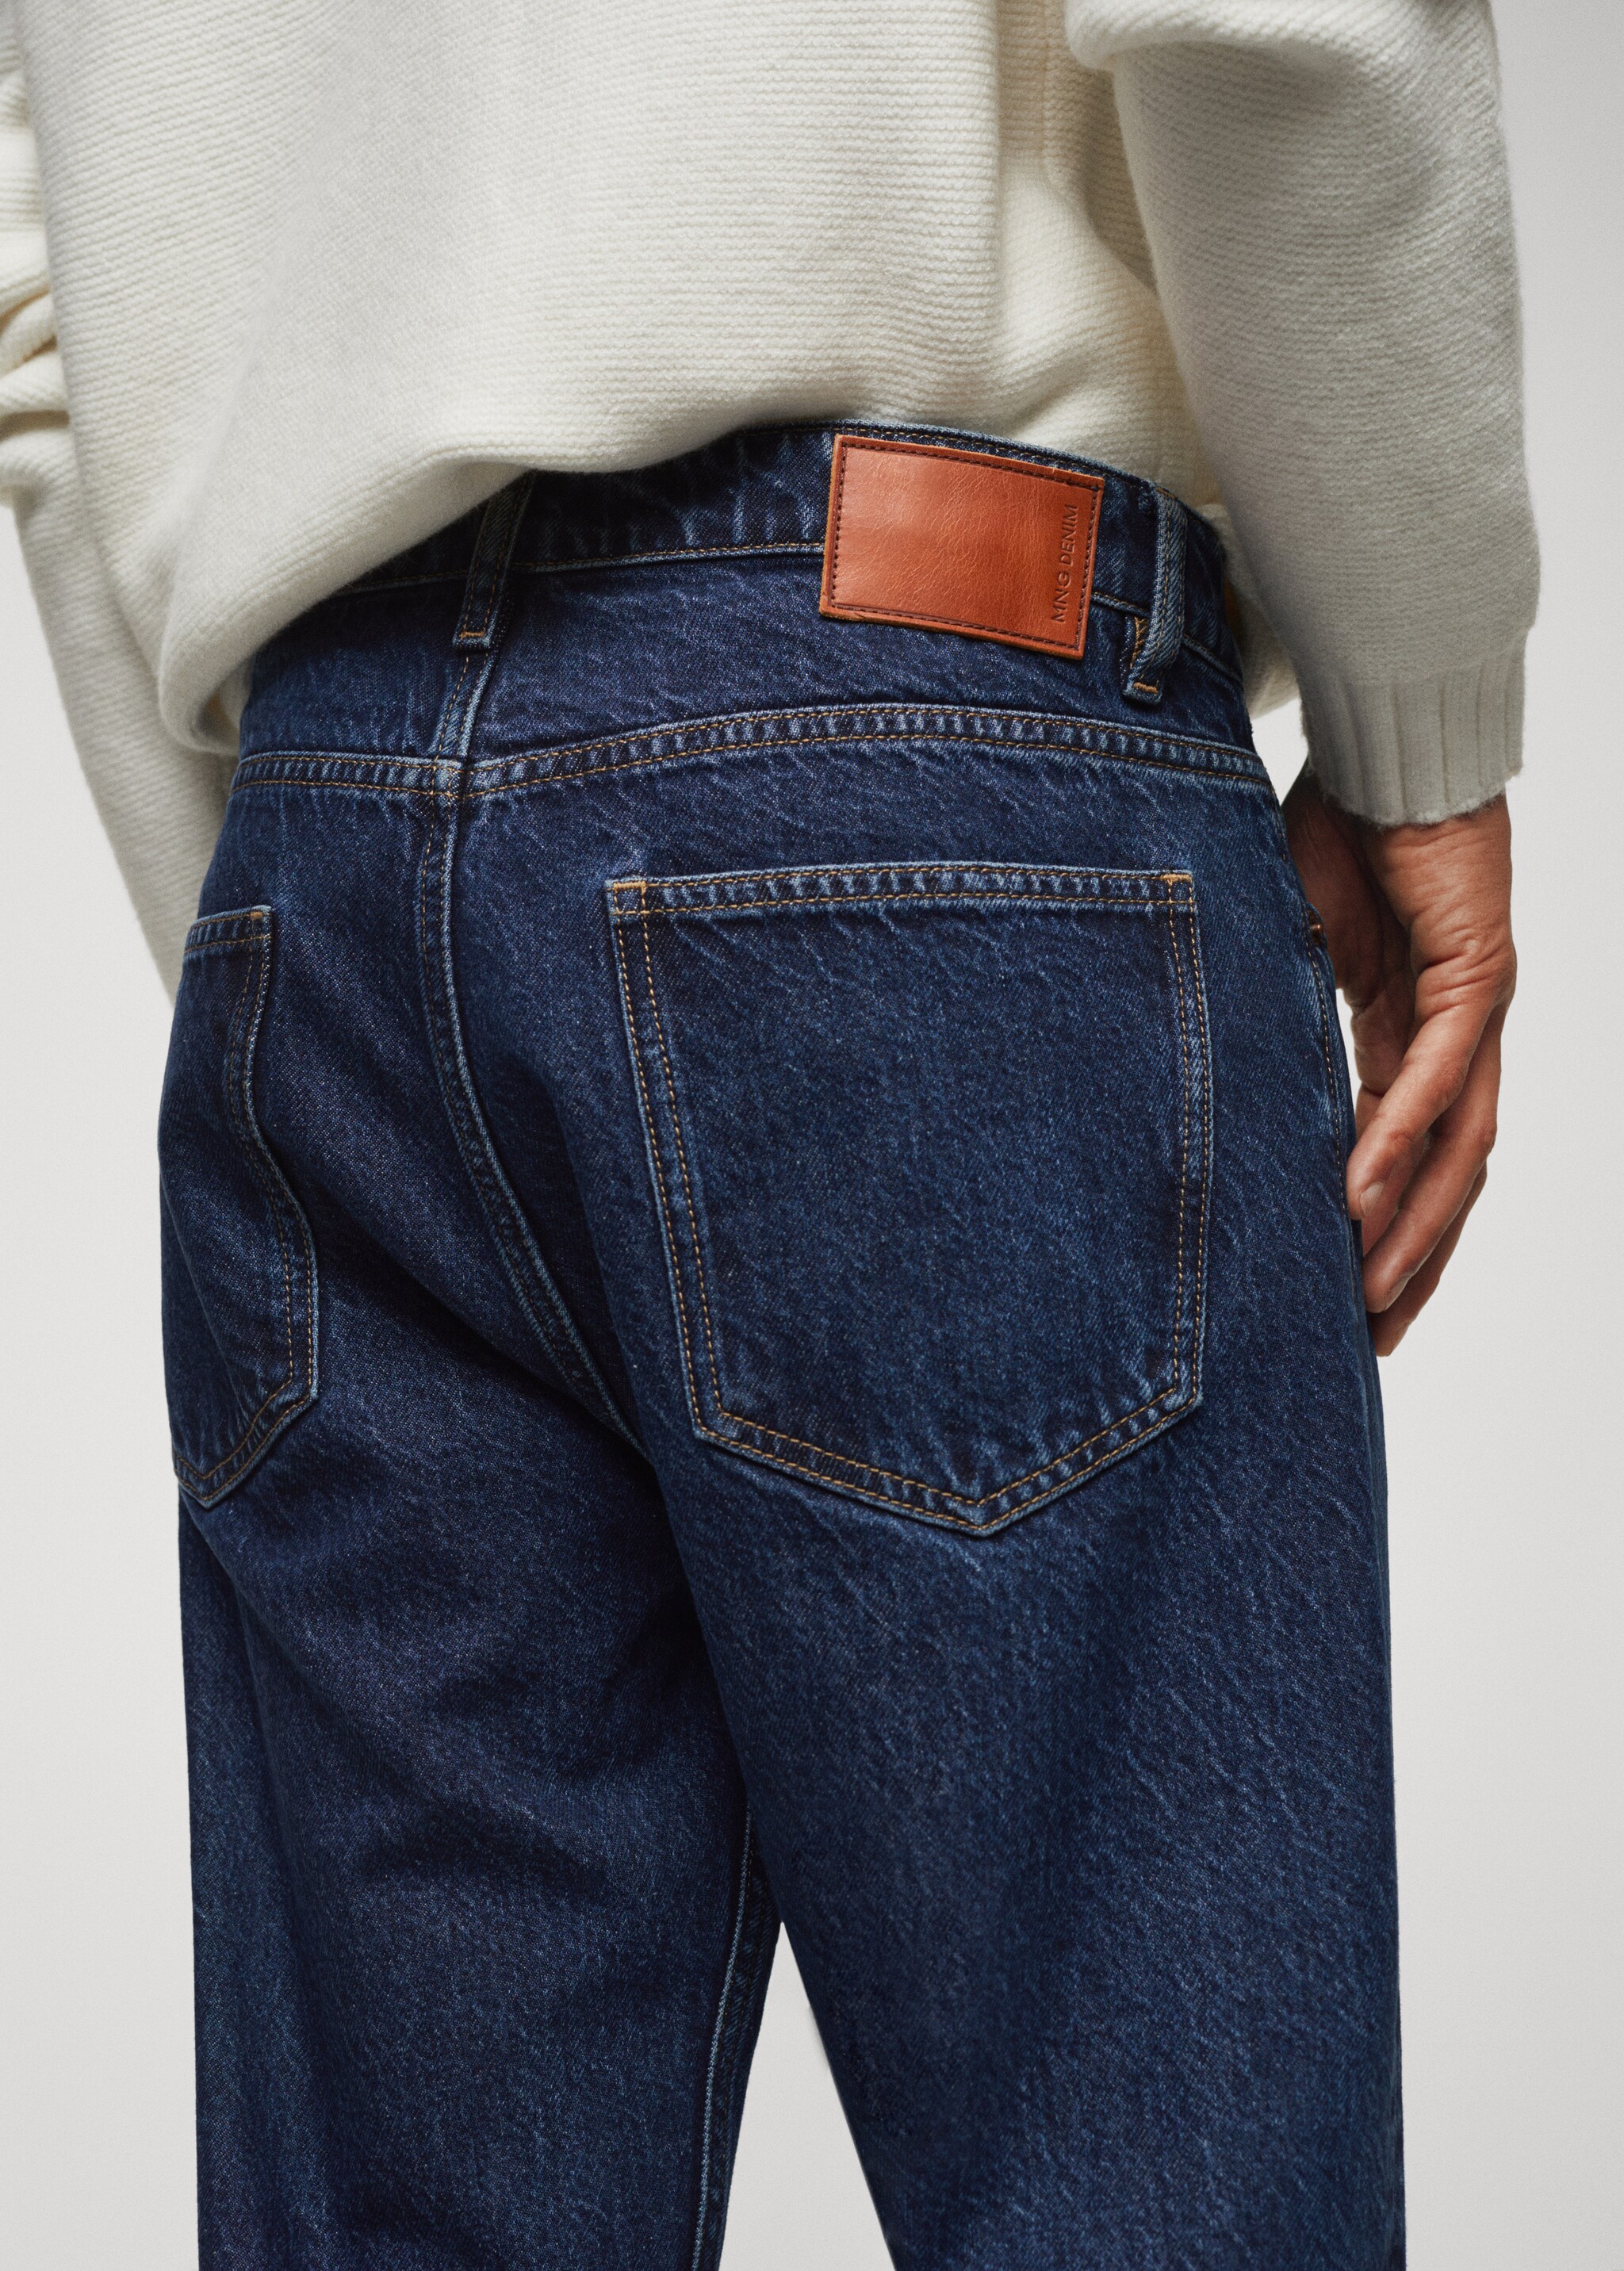 Sam tapper fit jeans - Details of the article 4